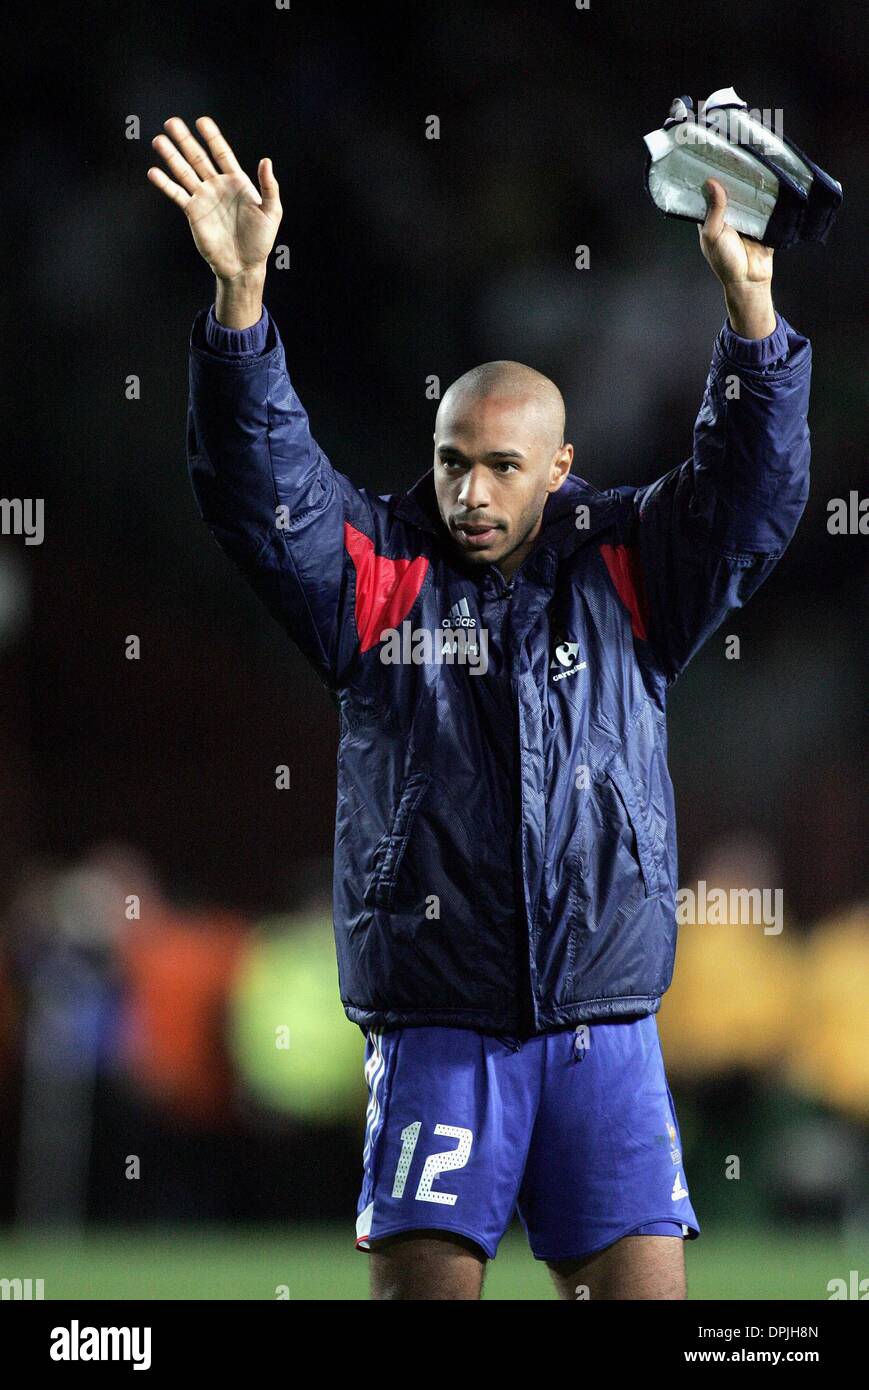 THIERRY HENRY.FRANCE & ARSENAL FC.REP OF IRELAND V FRANCE.LANSDOWNE ROAD,DUBLIN.07/09/2005.DIJ36942.K47872.WORLD CUP PREVIEW 2006 Stock Photo